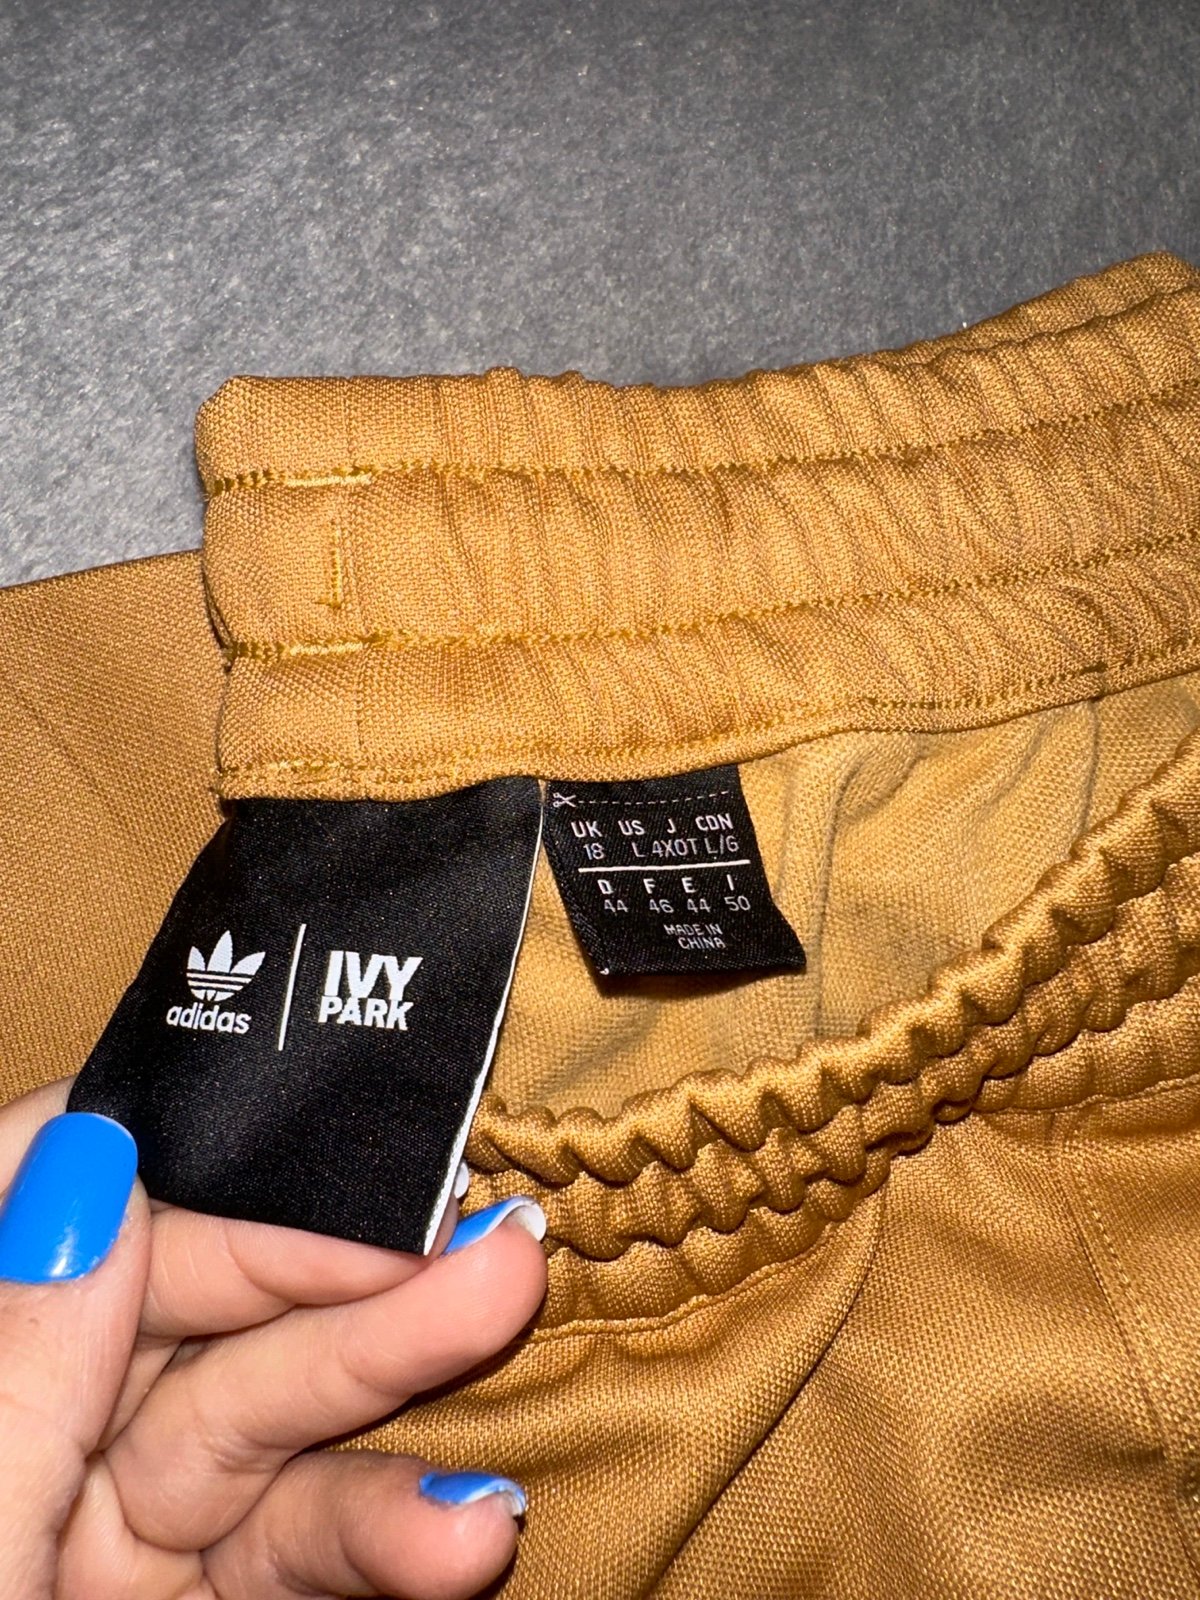 Affordable Wide leg pants Adidas + Ivy Park size small nqasADAww online store